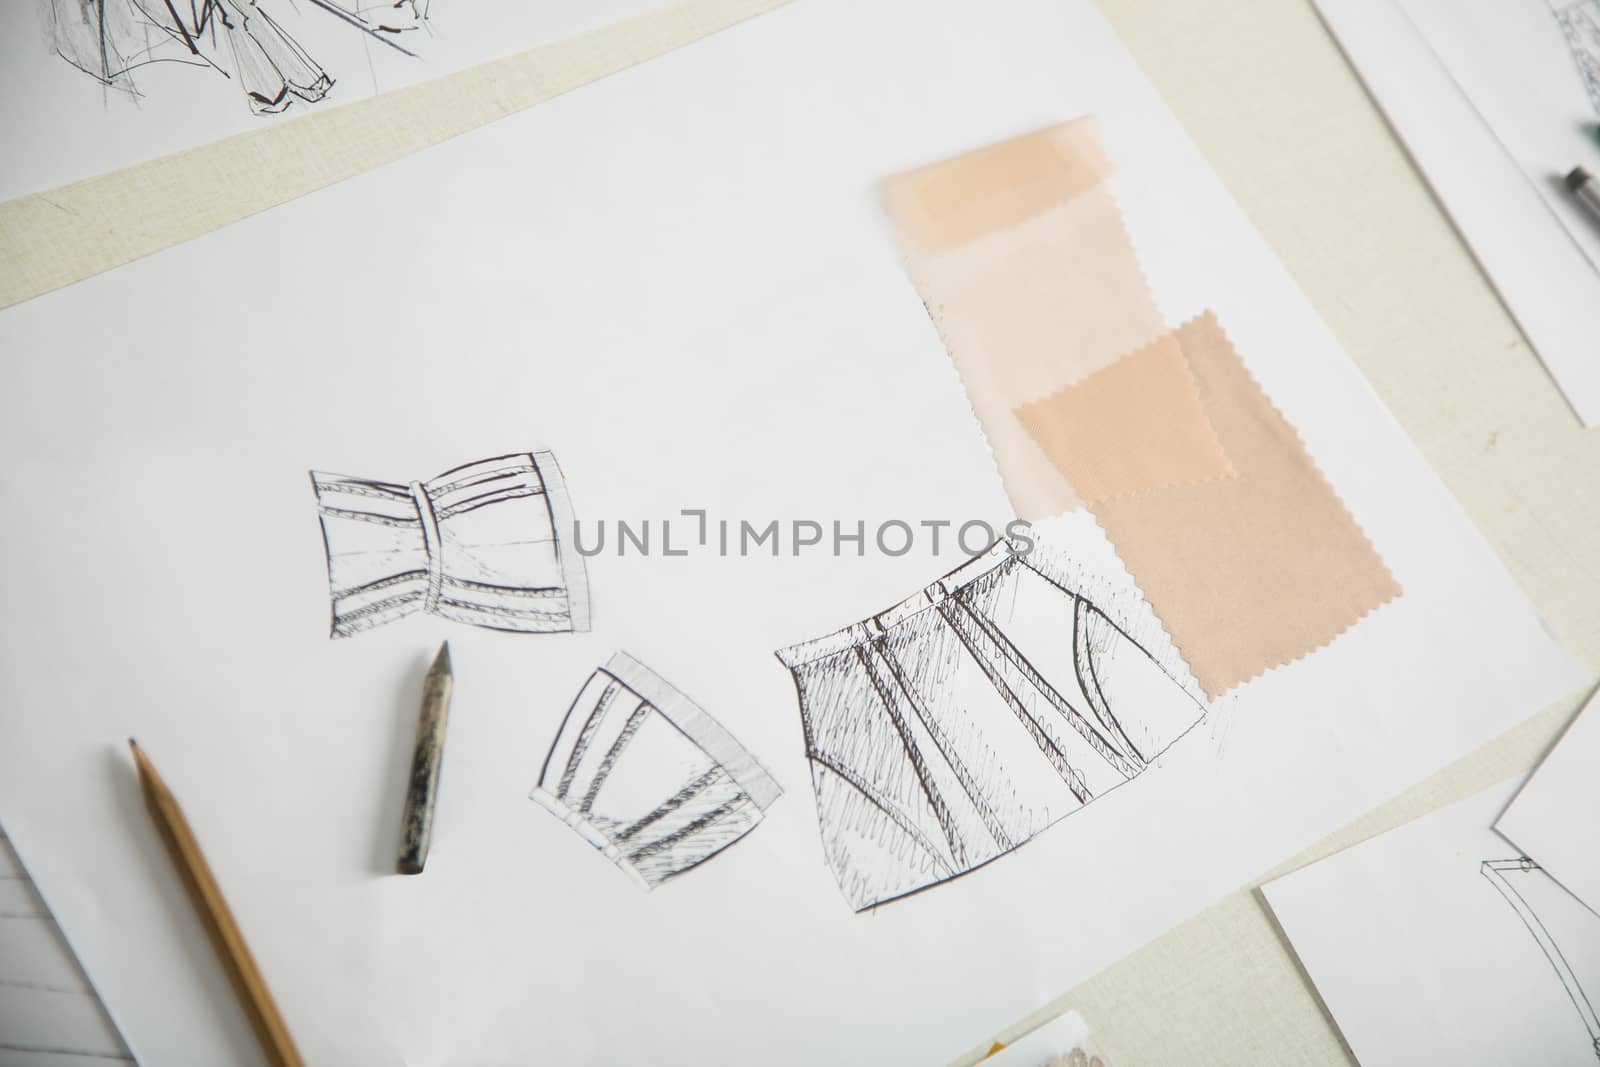 fashion designers, working in progress on tailor table